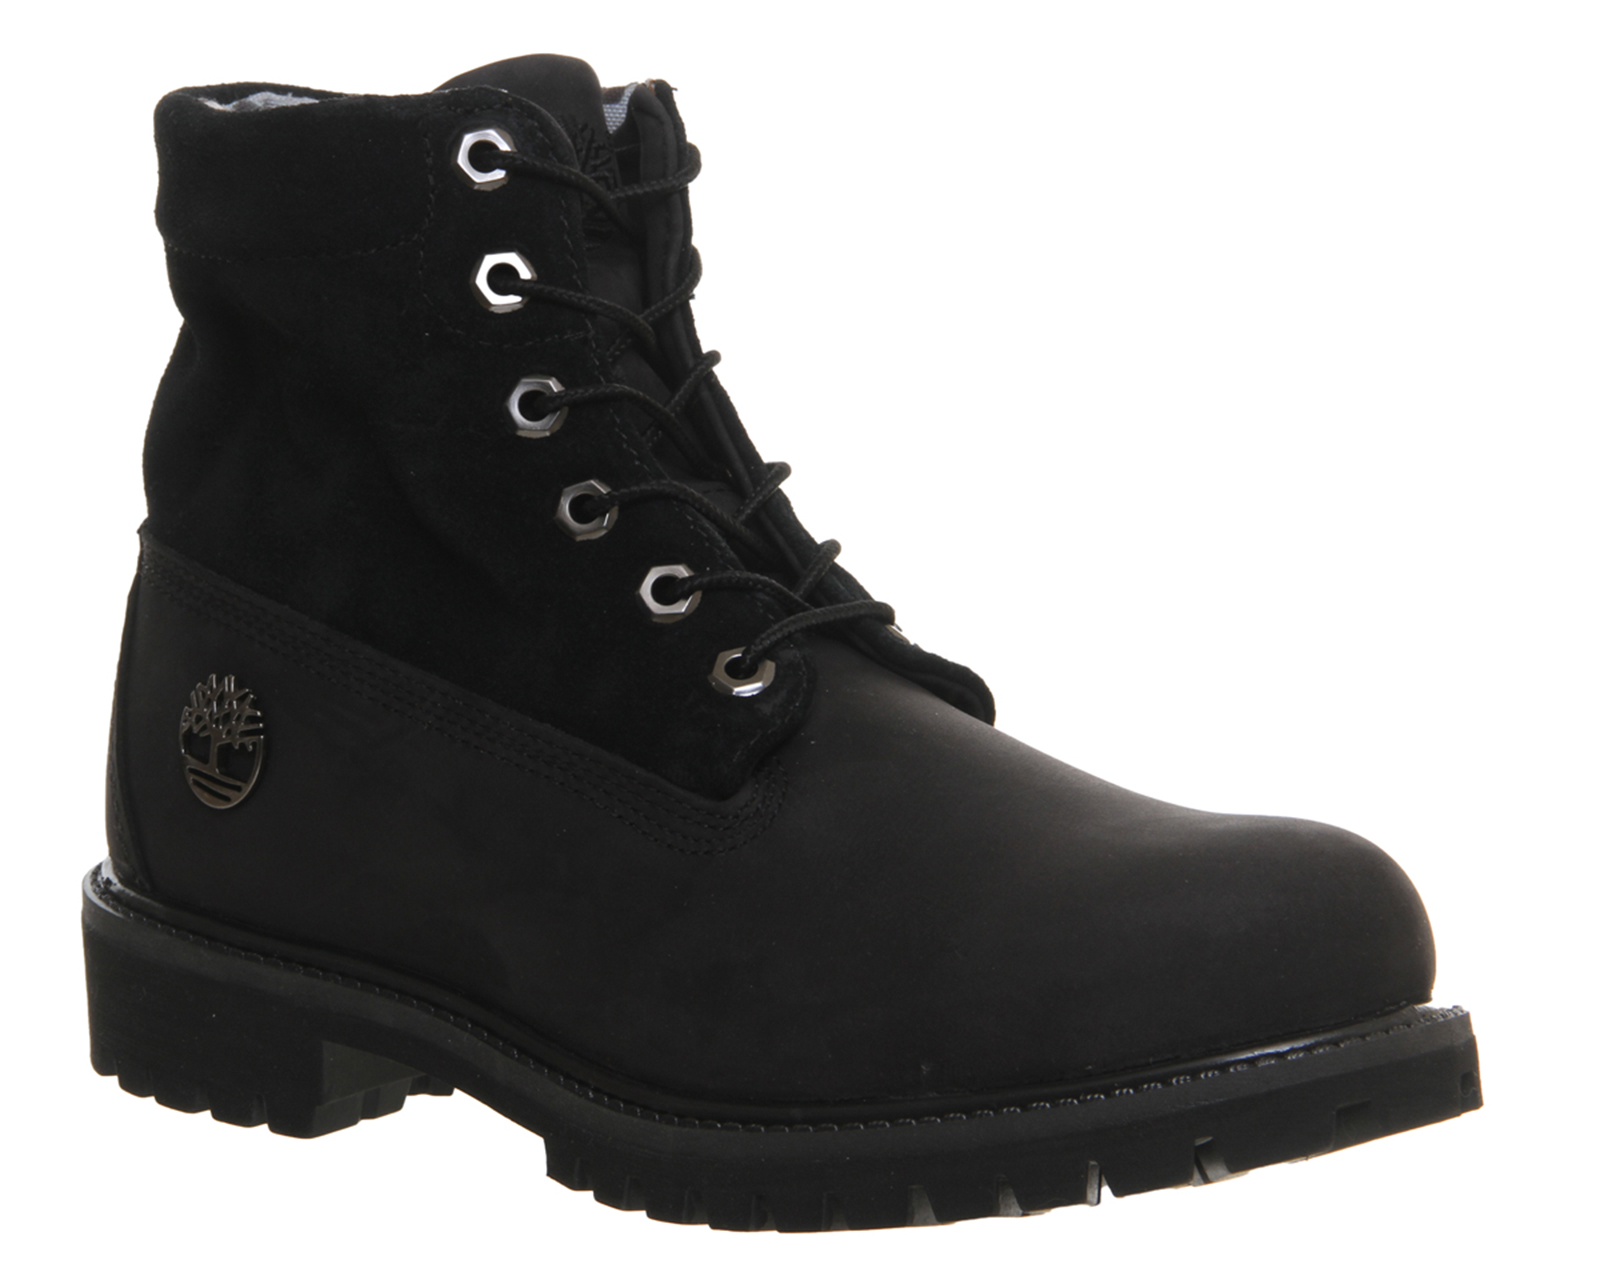 Timberland Roll Top Boots Black Camo 